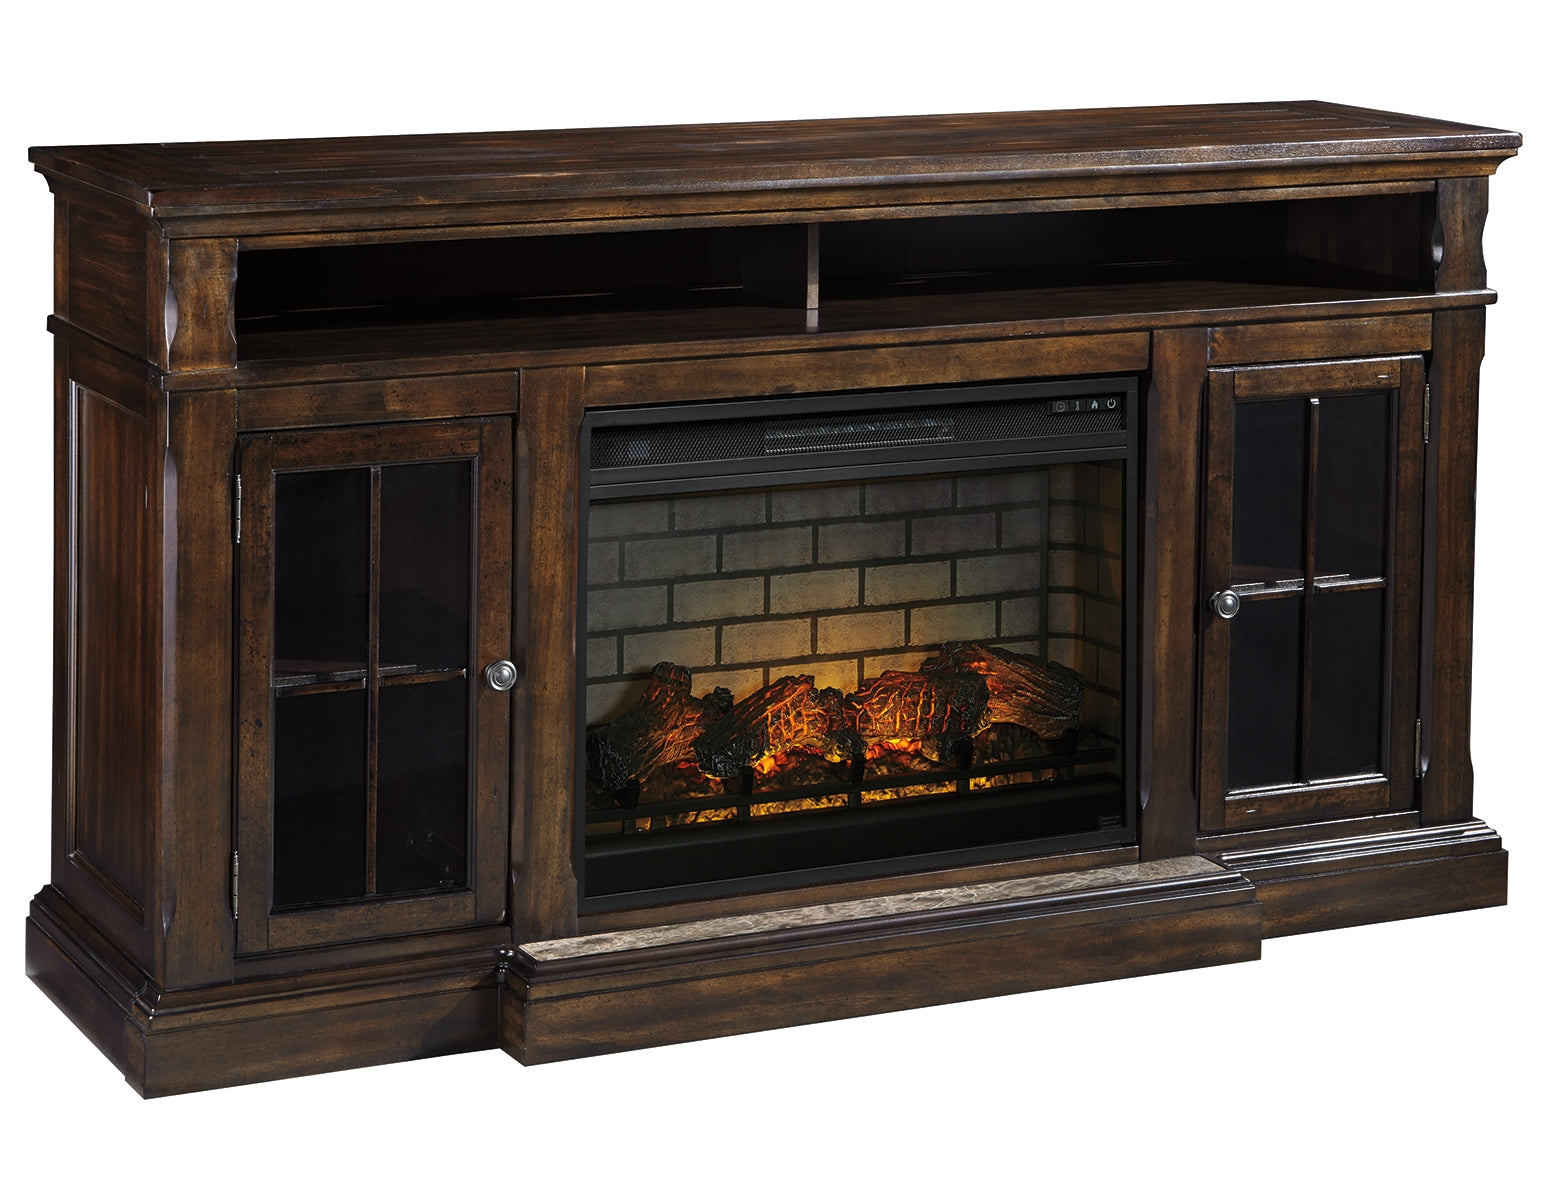 Roddinton 74" TV Stand with Electric Fireplace